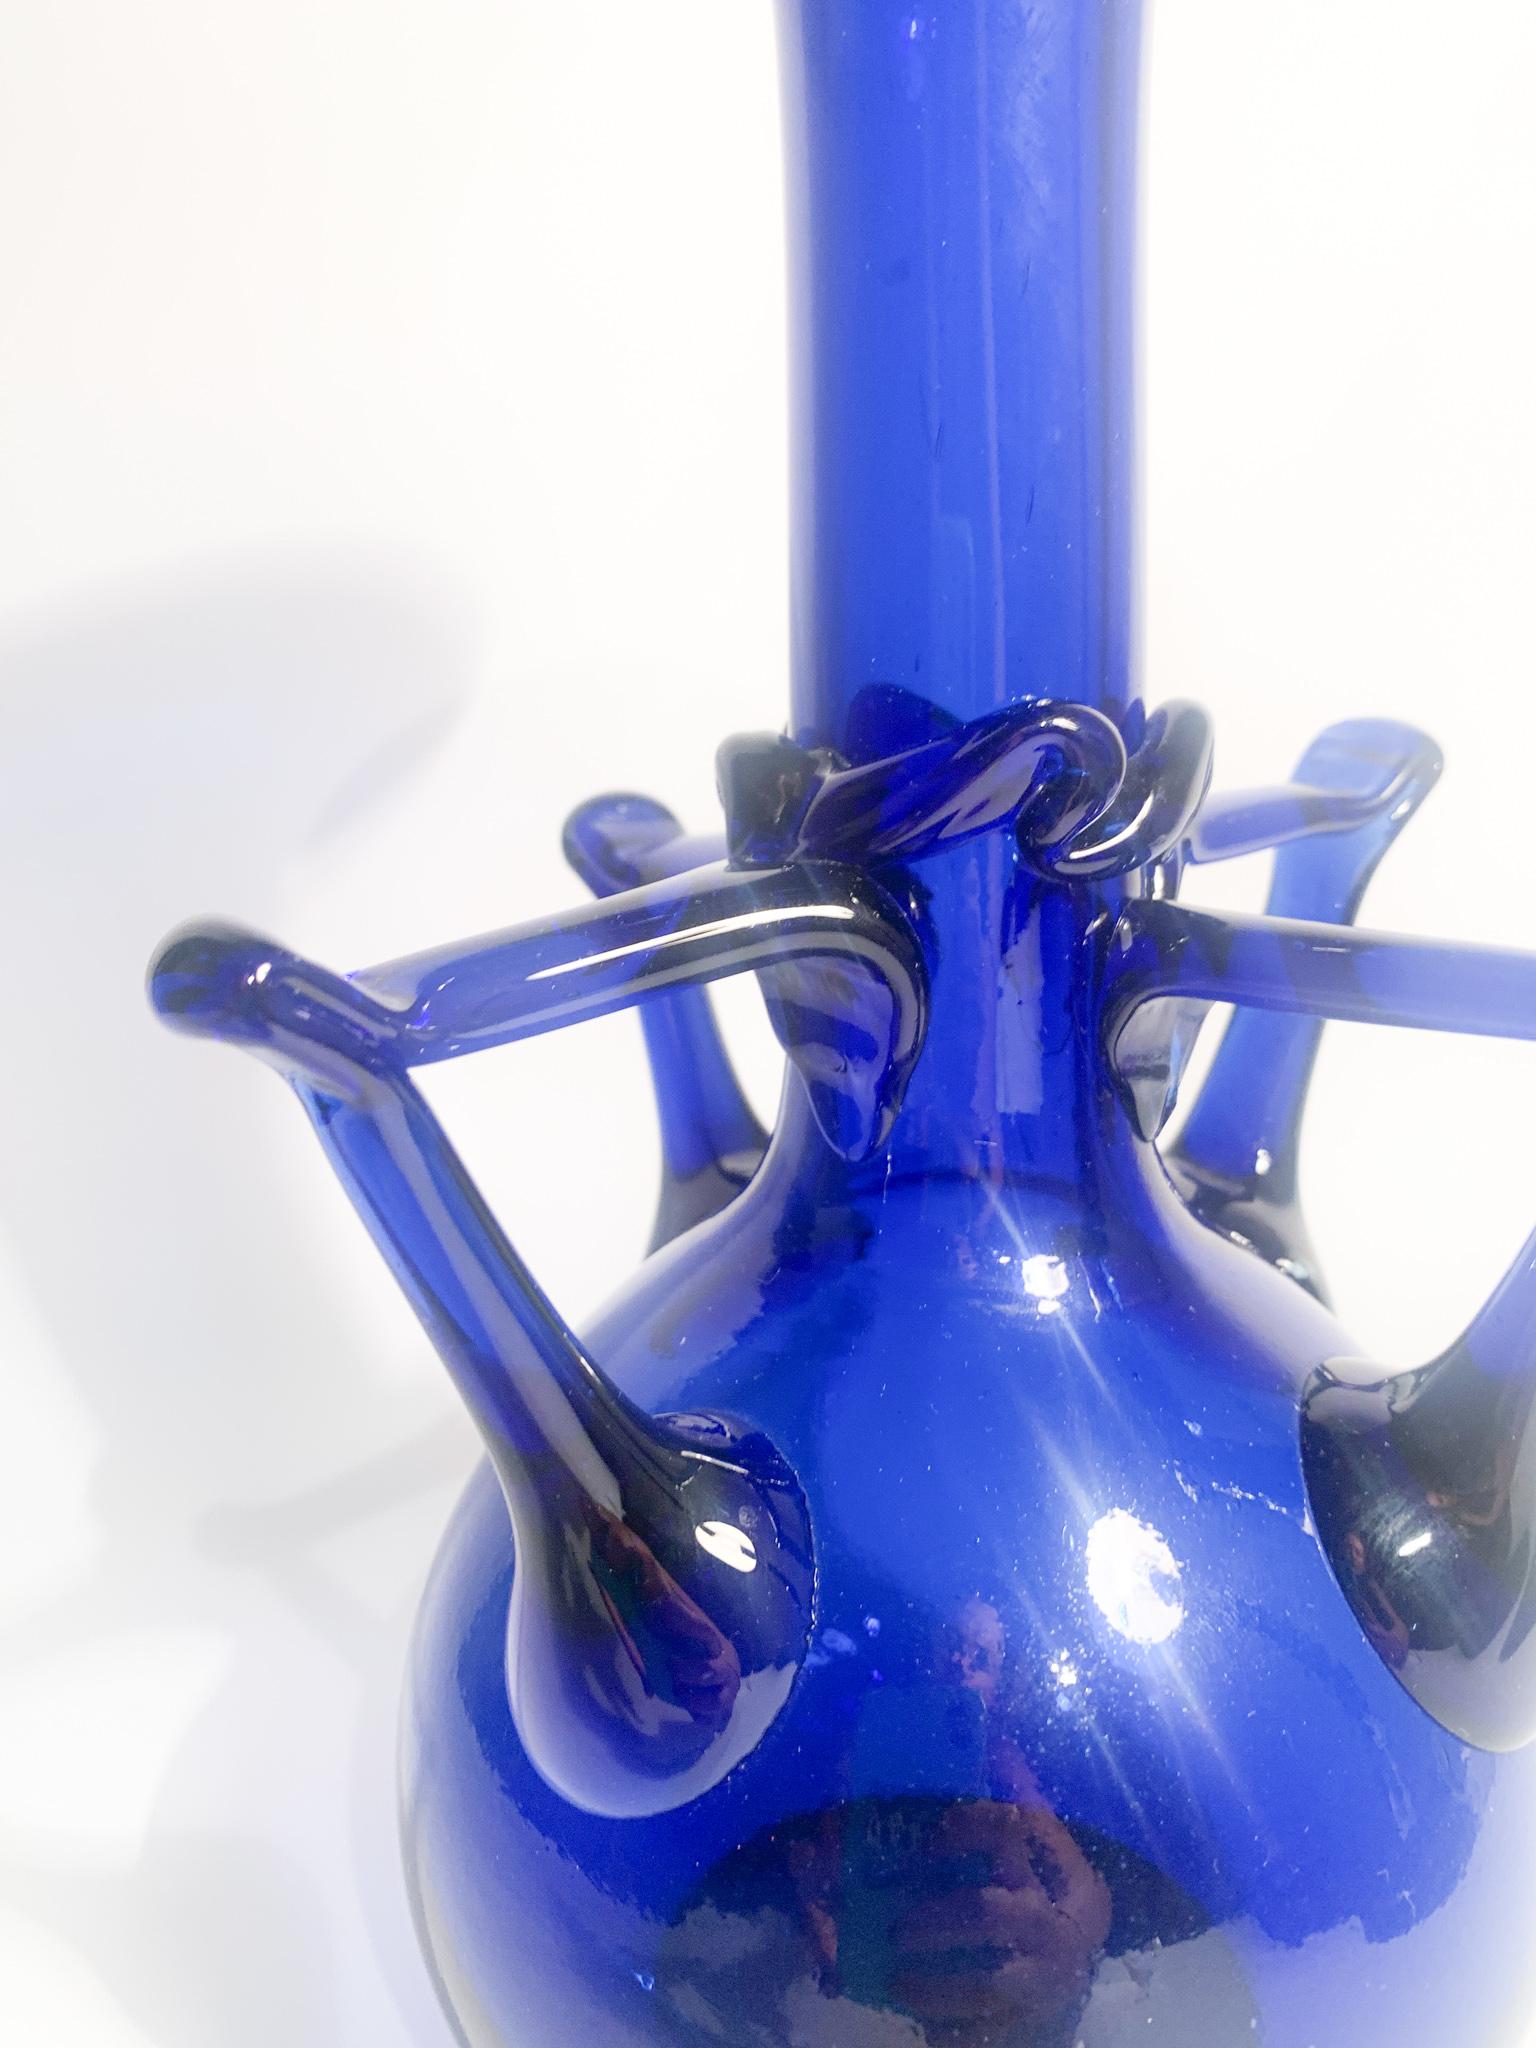 Mid-20th Century Italian Blue Murano Glass Vase Attributed to Fratelli Toso, 1940s For Sale